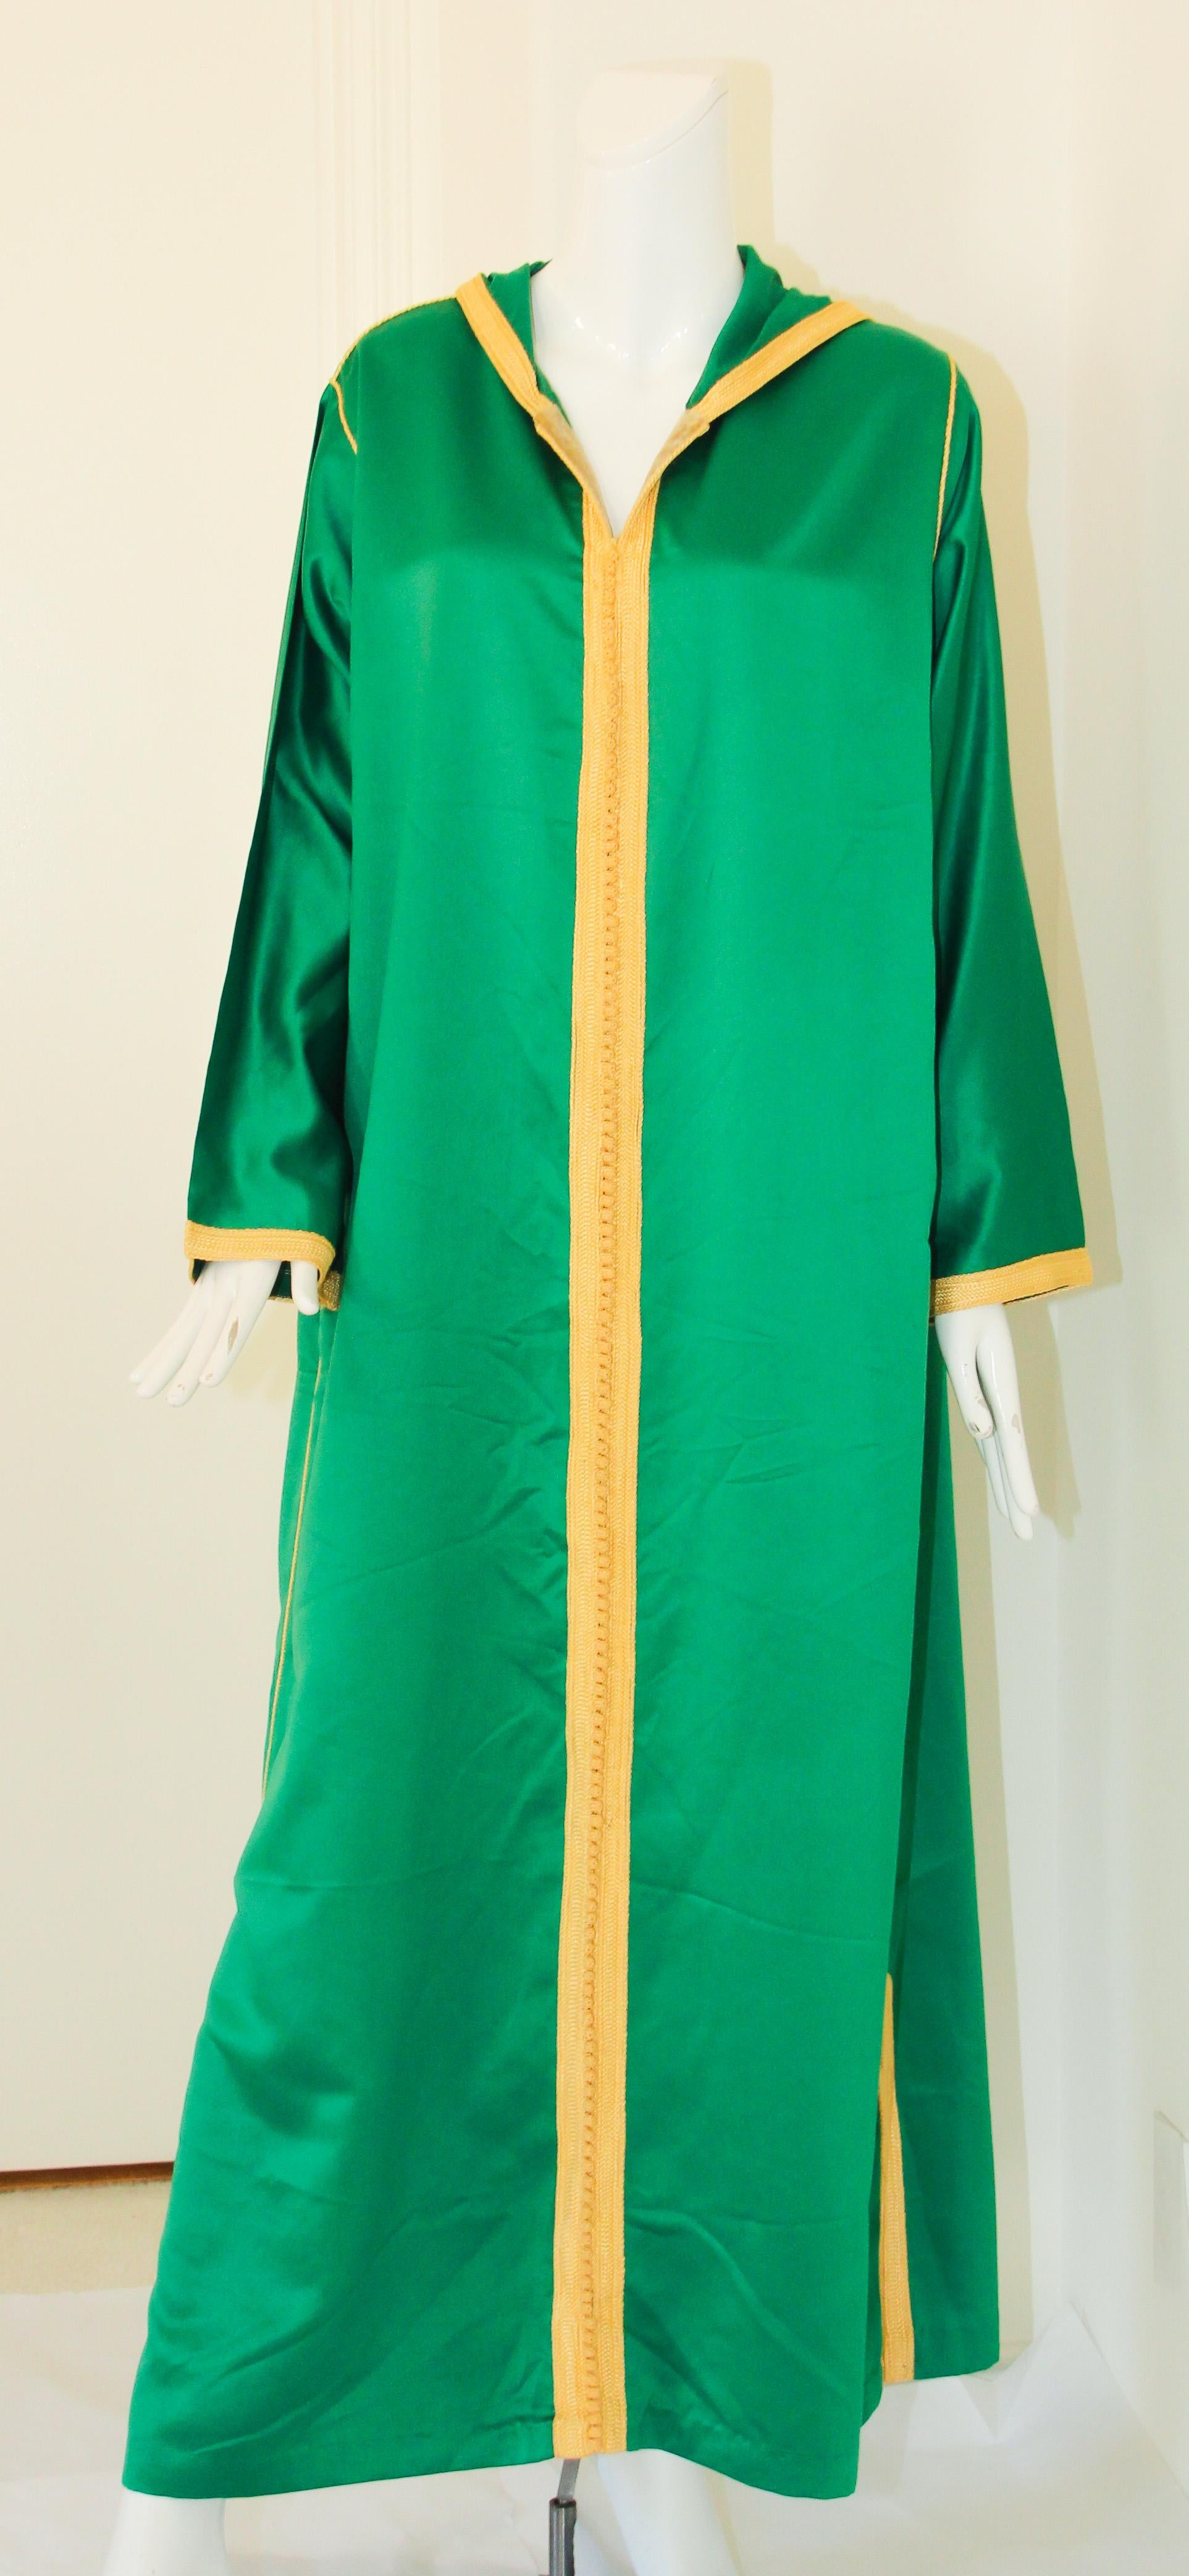 Vintage hooded Moroccan emerald green caftan with gold trim embroidered,
circa 1970s.
This light summery djellabah is crafted in Morocco and tailored for a relaxed fit.
The hood features a gold tassel, there are side pockets.
Great to use around the